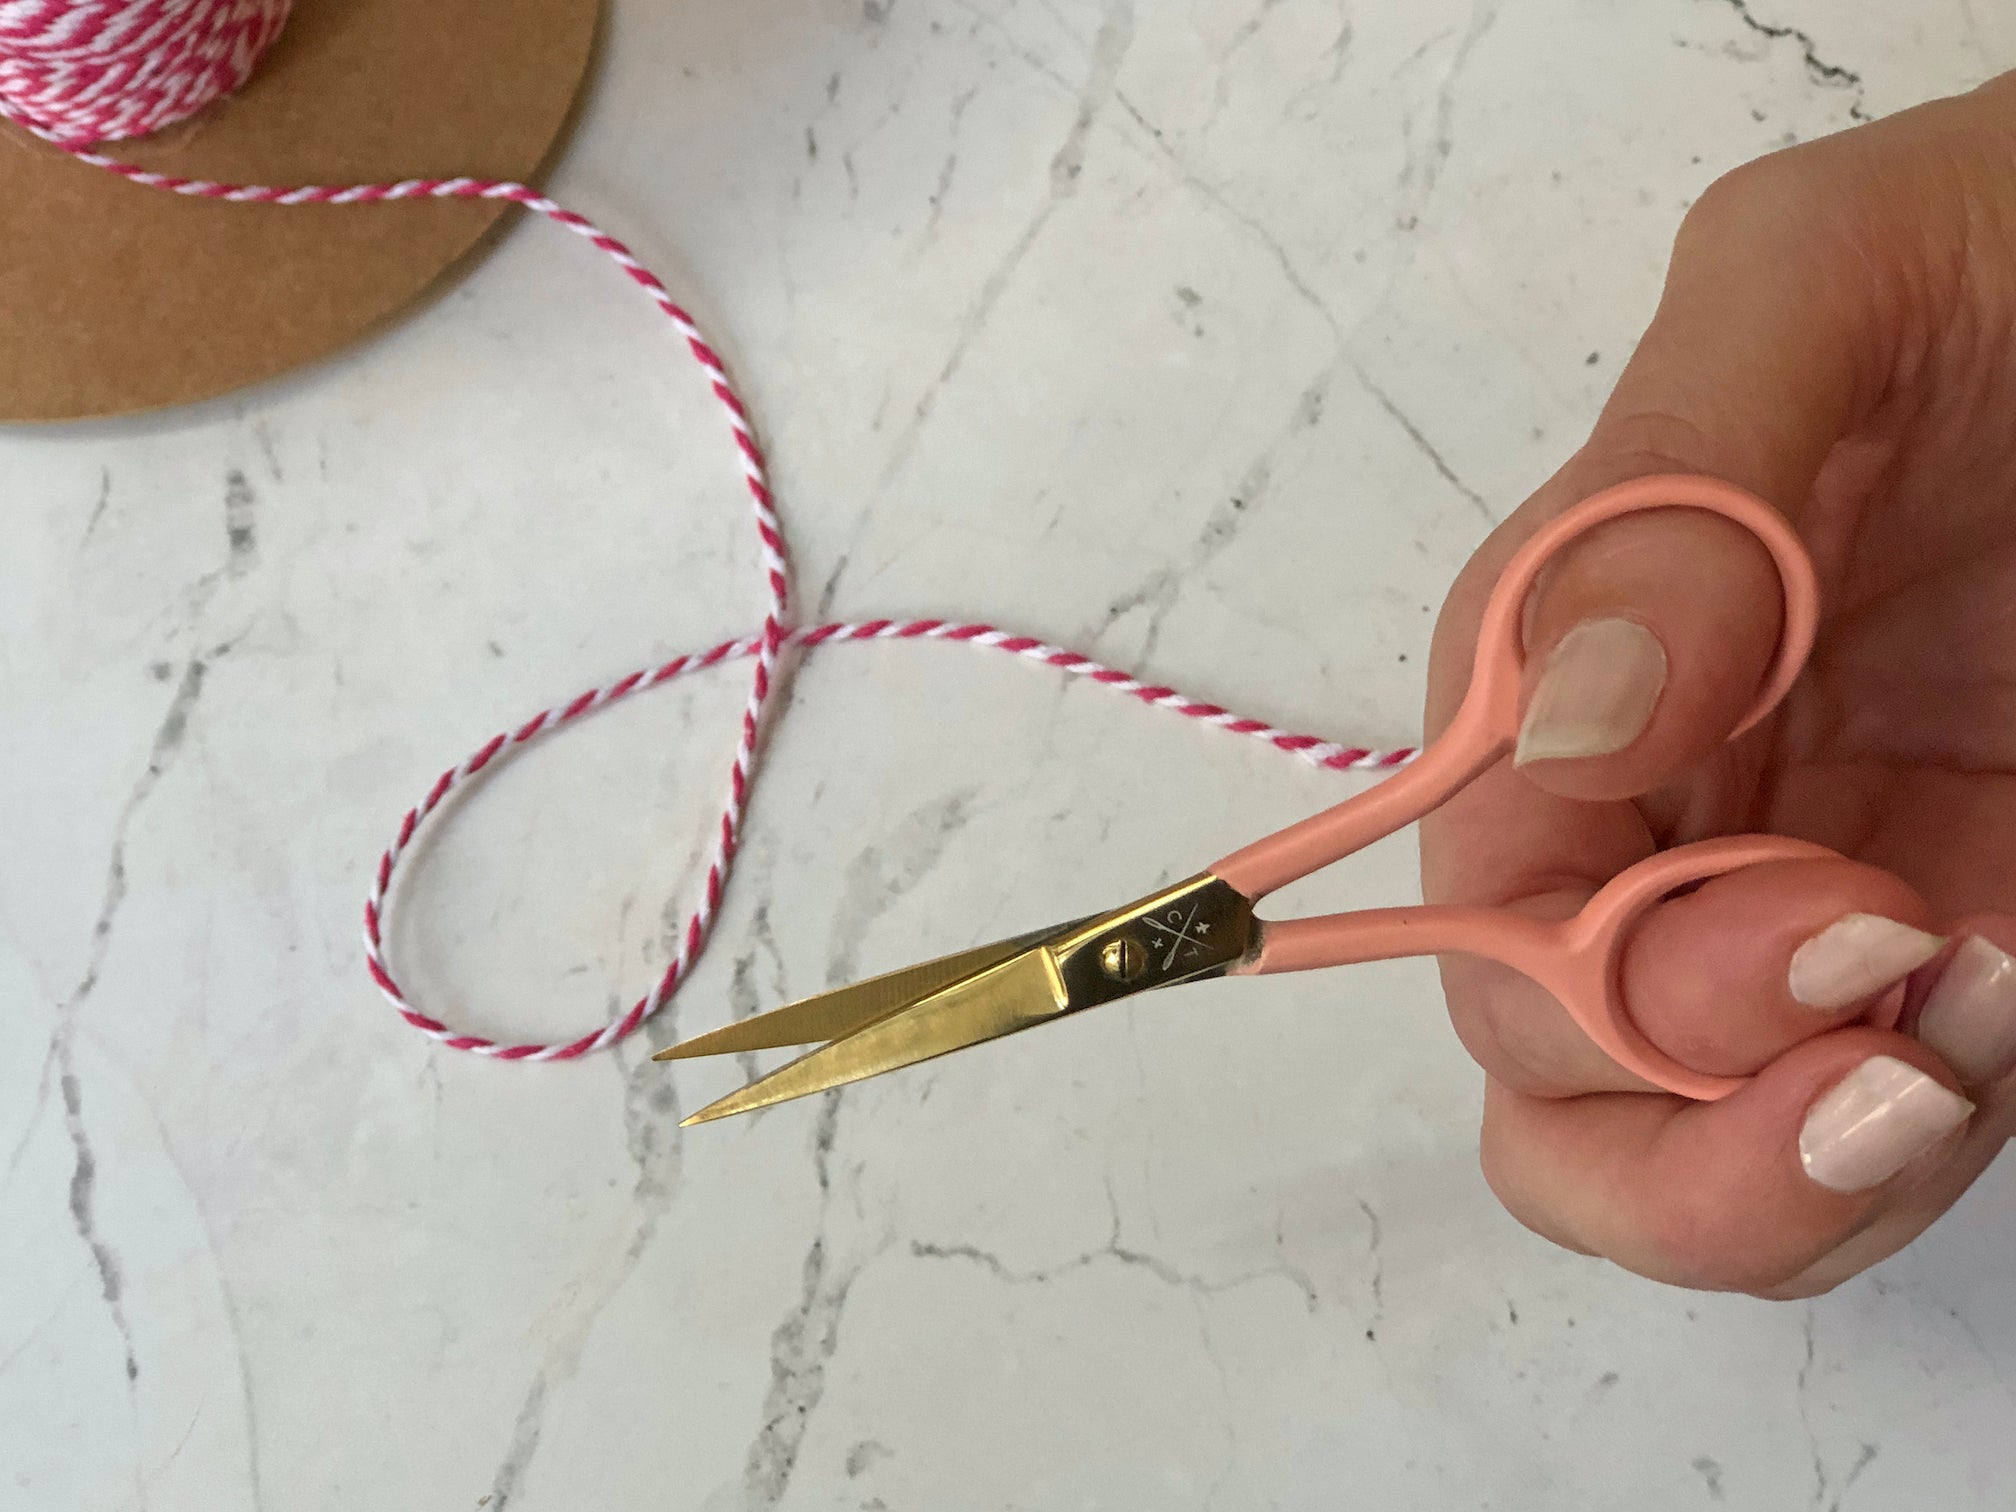 Colorful Embroidery Scissors